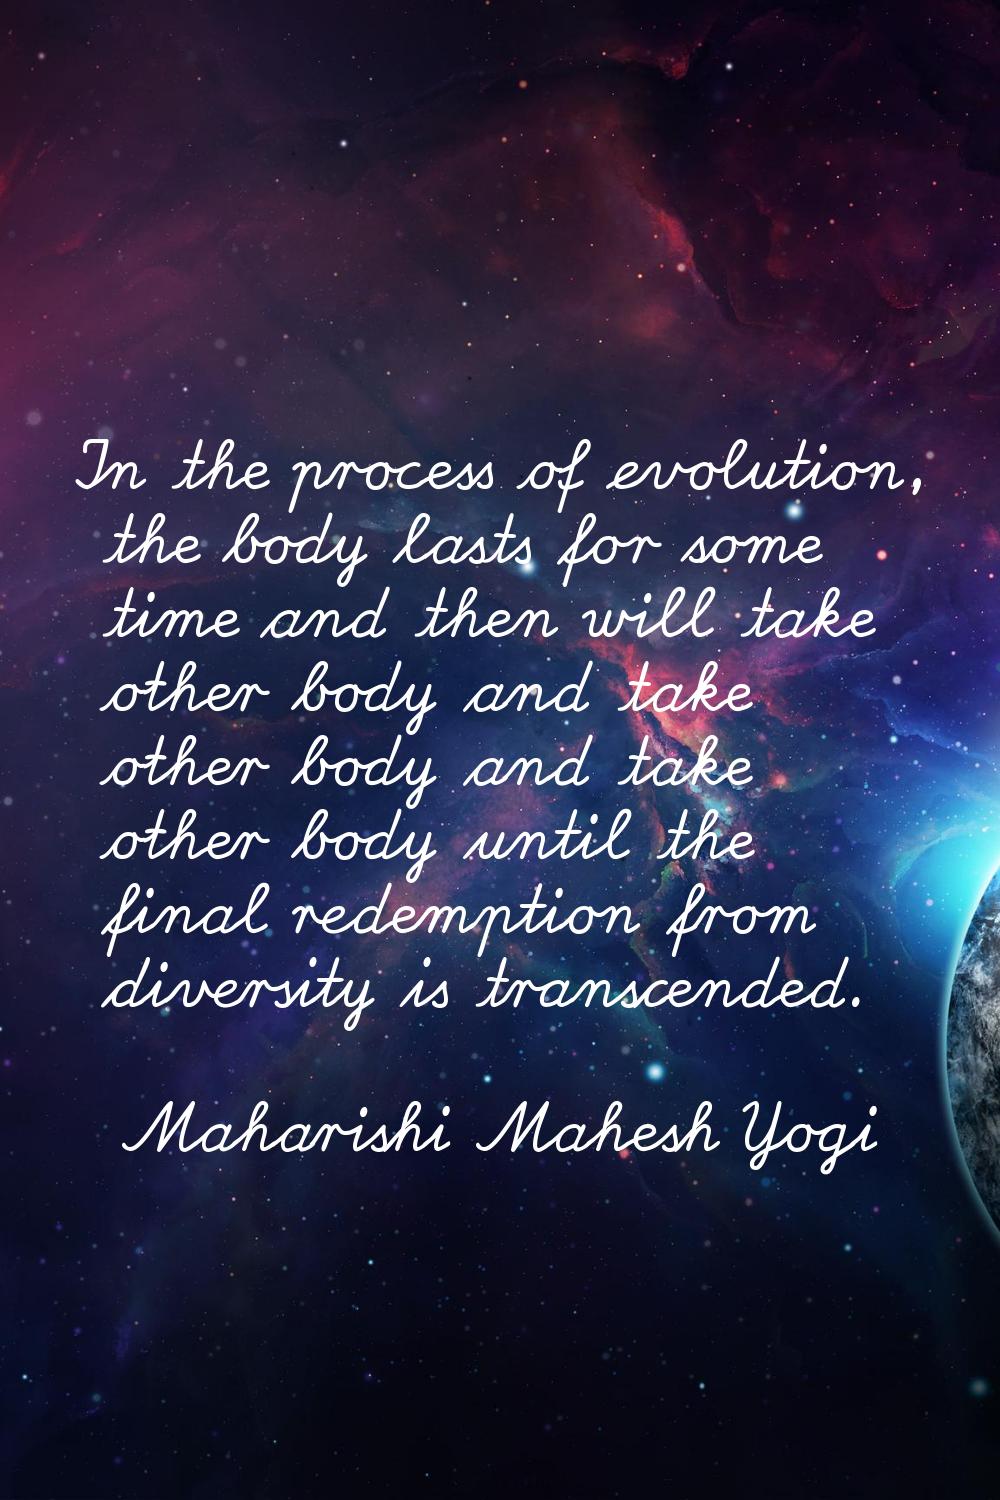 In the process of evolution, the body lasts for some time and then will take other body and take ot